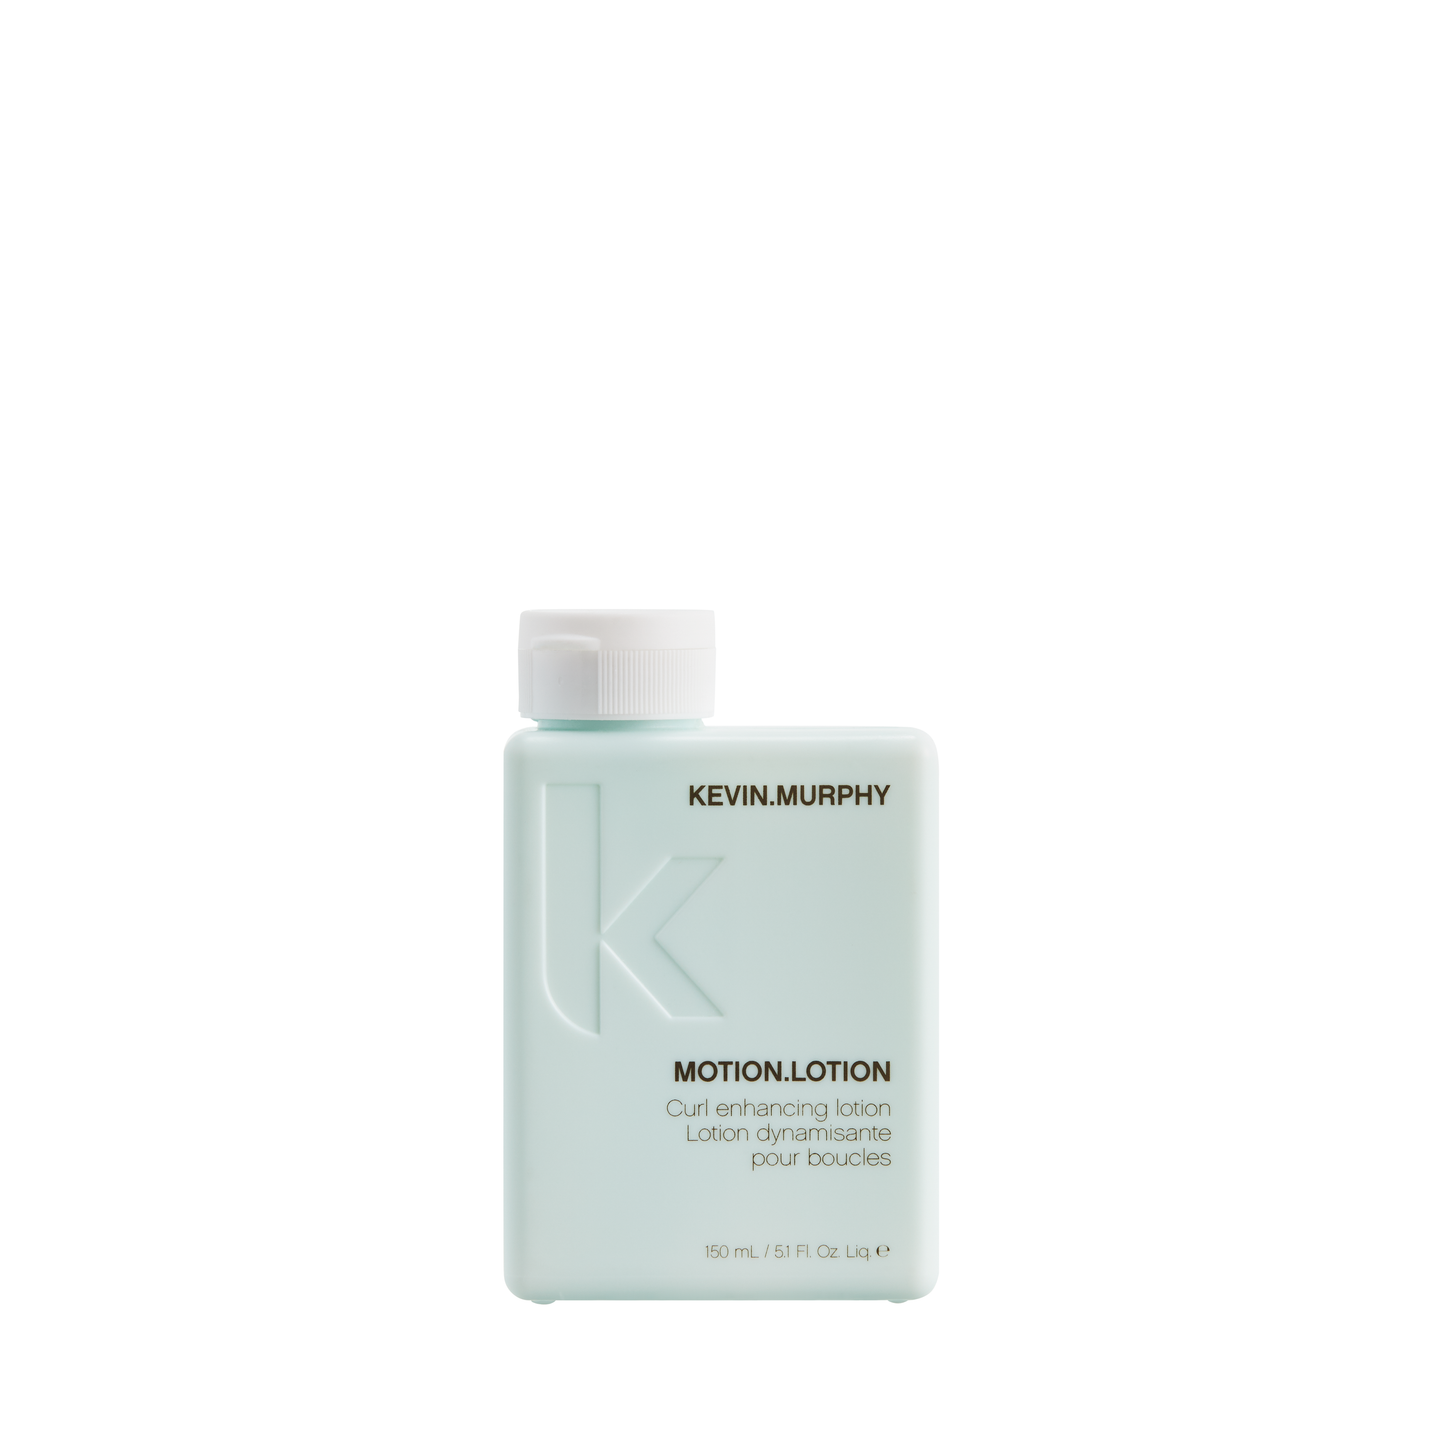 KEVIN.MURPHY - MOTION.LOTION